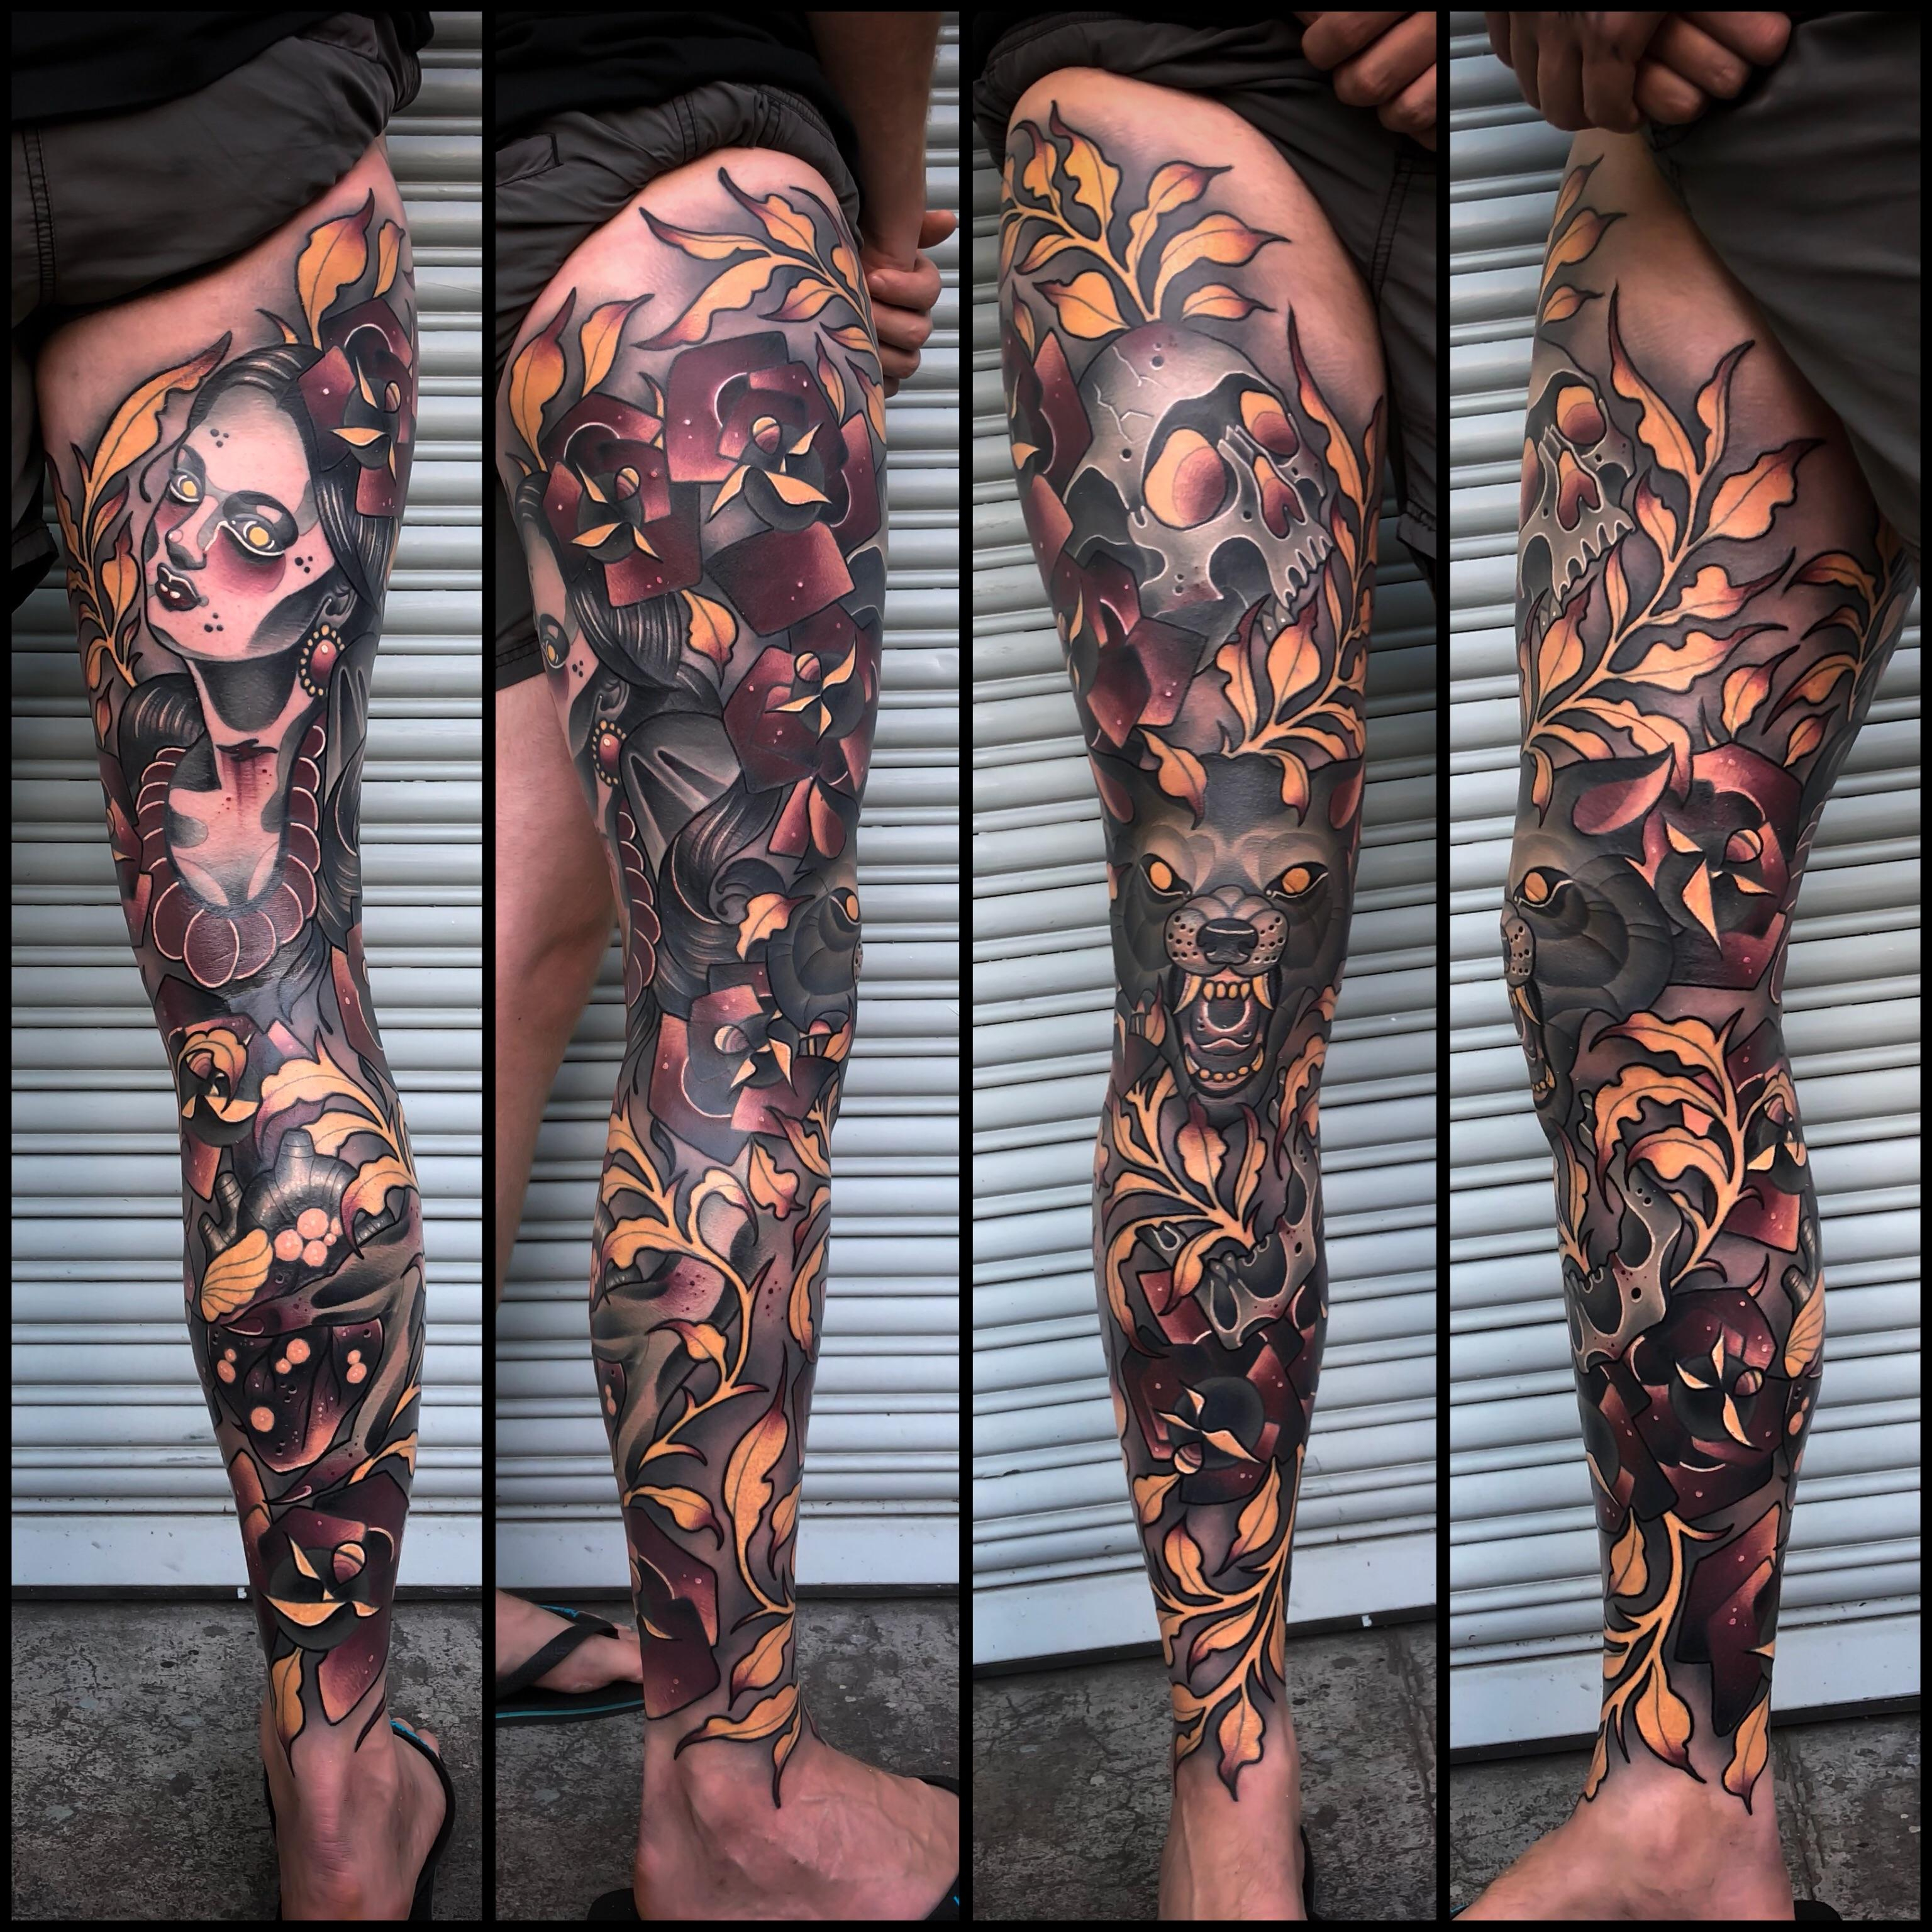 My Leg Sleeve Matt Curzon Out Of Empire In Prahran Melbourne intended for sizing 3072 X 3072